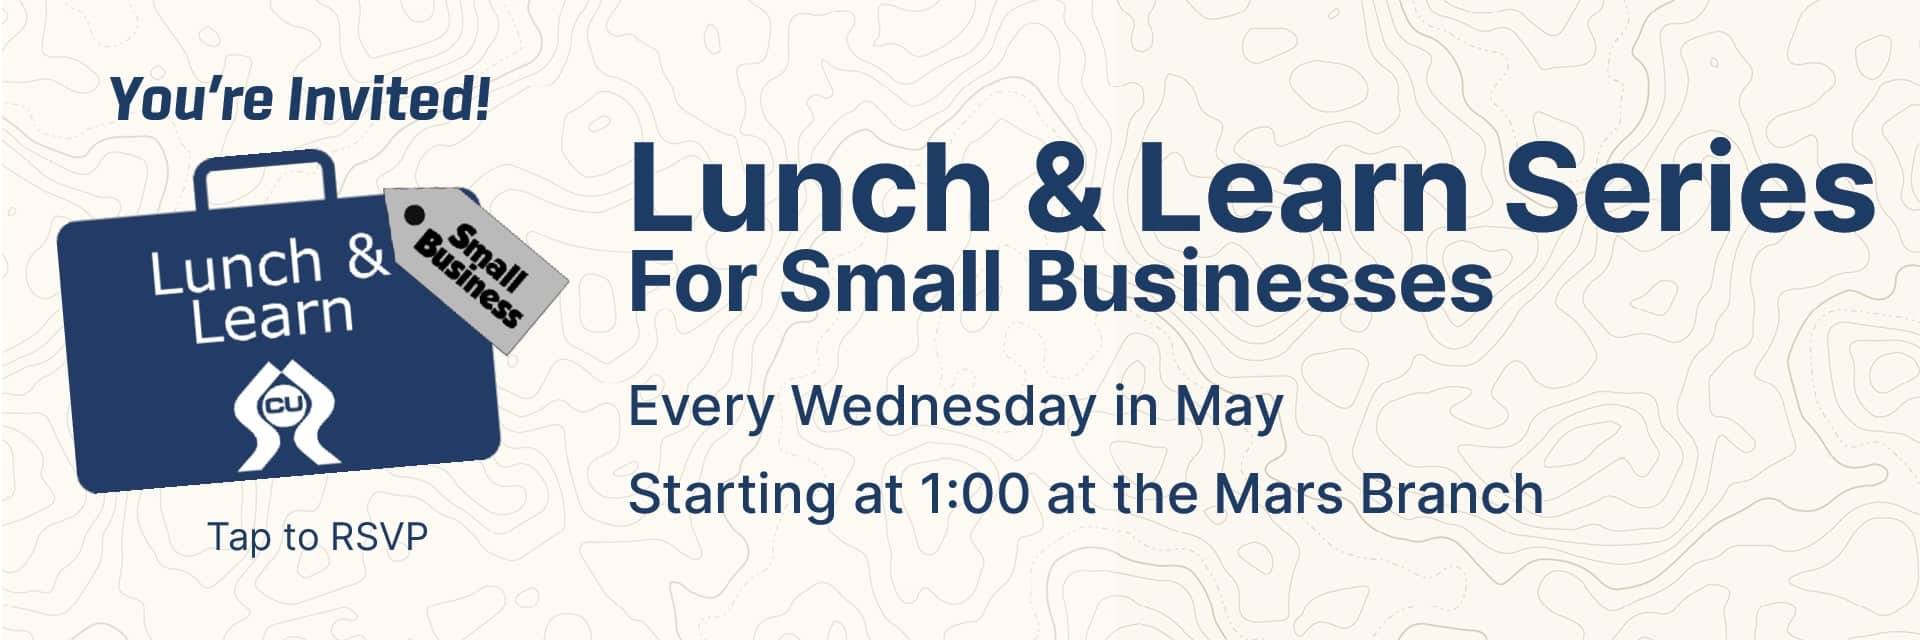 Lunch & Learn For Small Business. Join us every Wednesday in May!